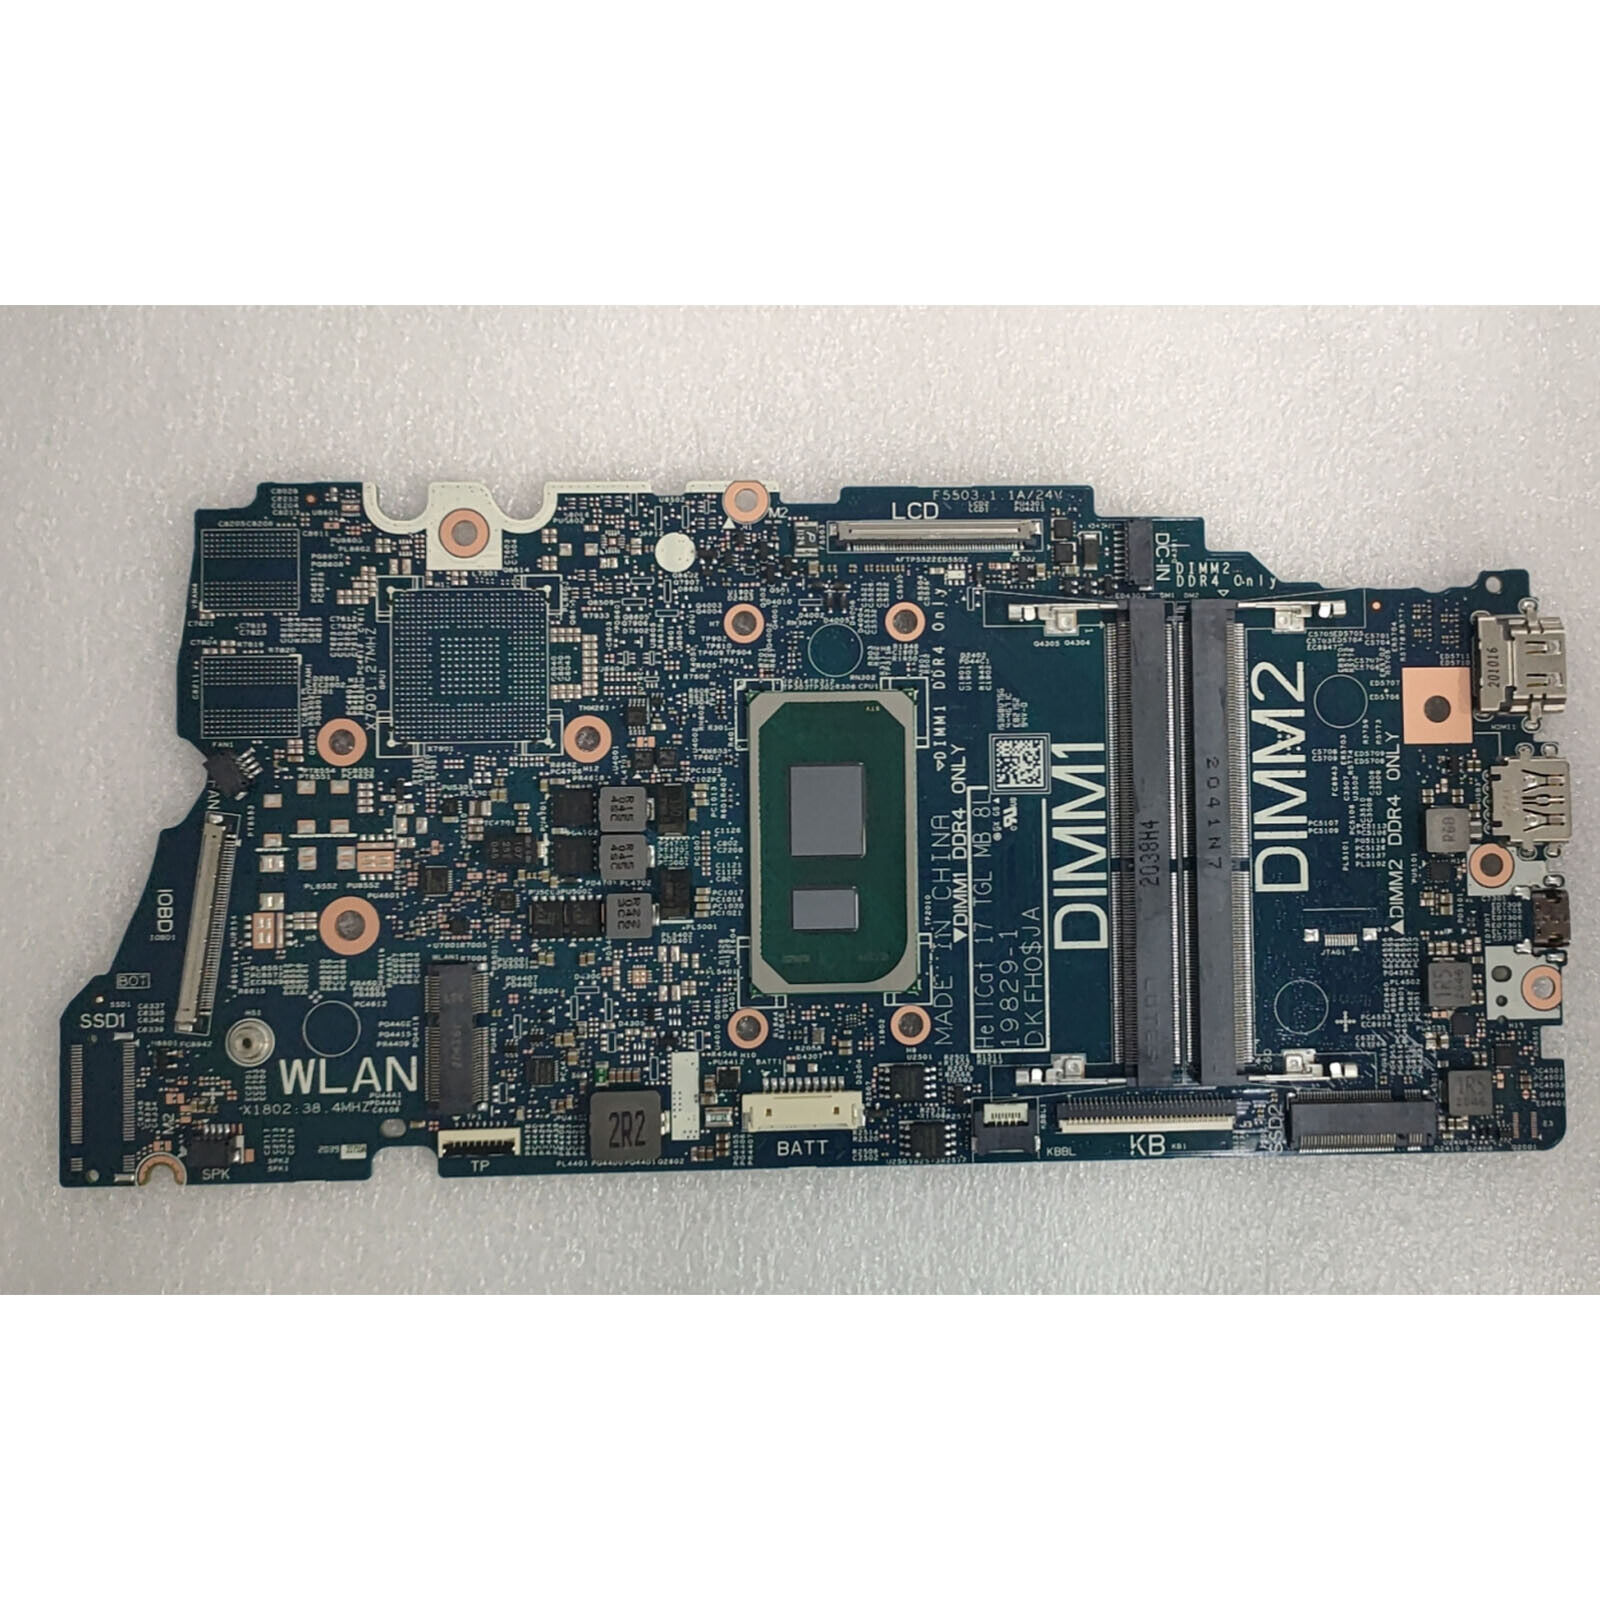 For Dell Inspiron 7706 Motherboard SRK02 i7-1165G7 19829-1 01MWH7 1MWH7